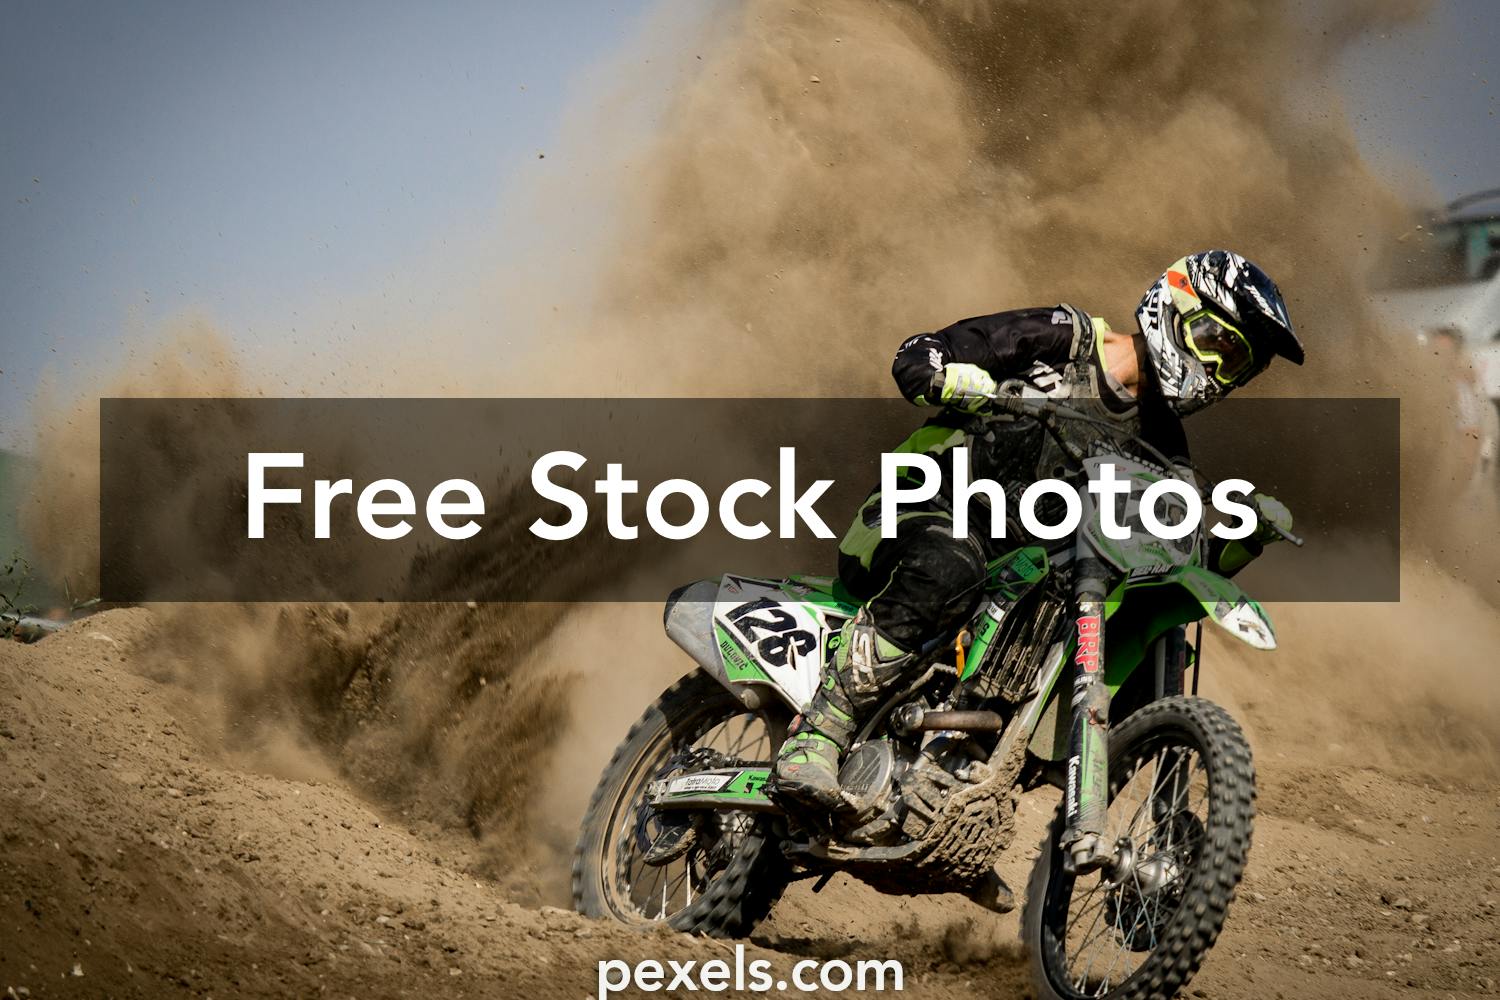 Mud Race Photos, Download The BEST Free Mud Race Stock Photos & HD Images